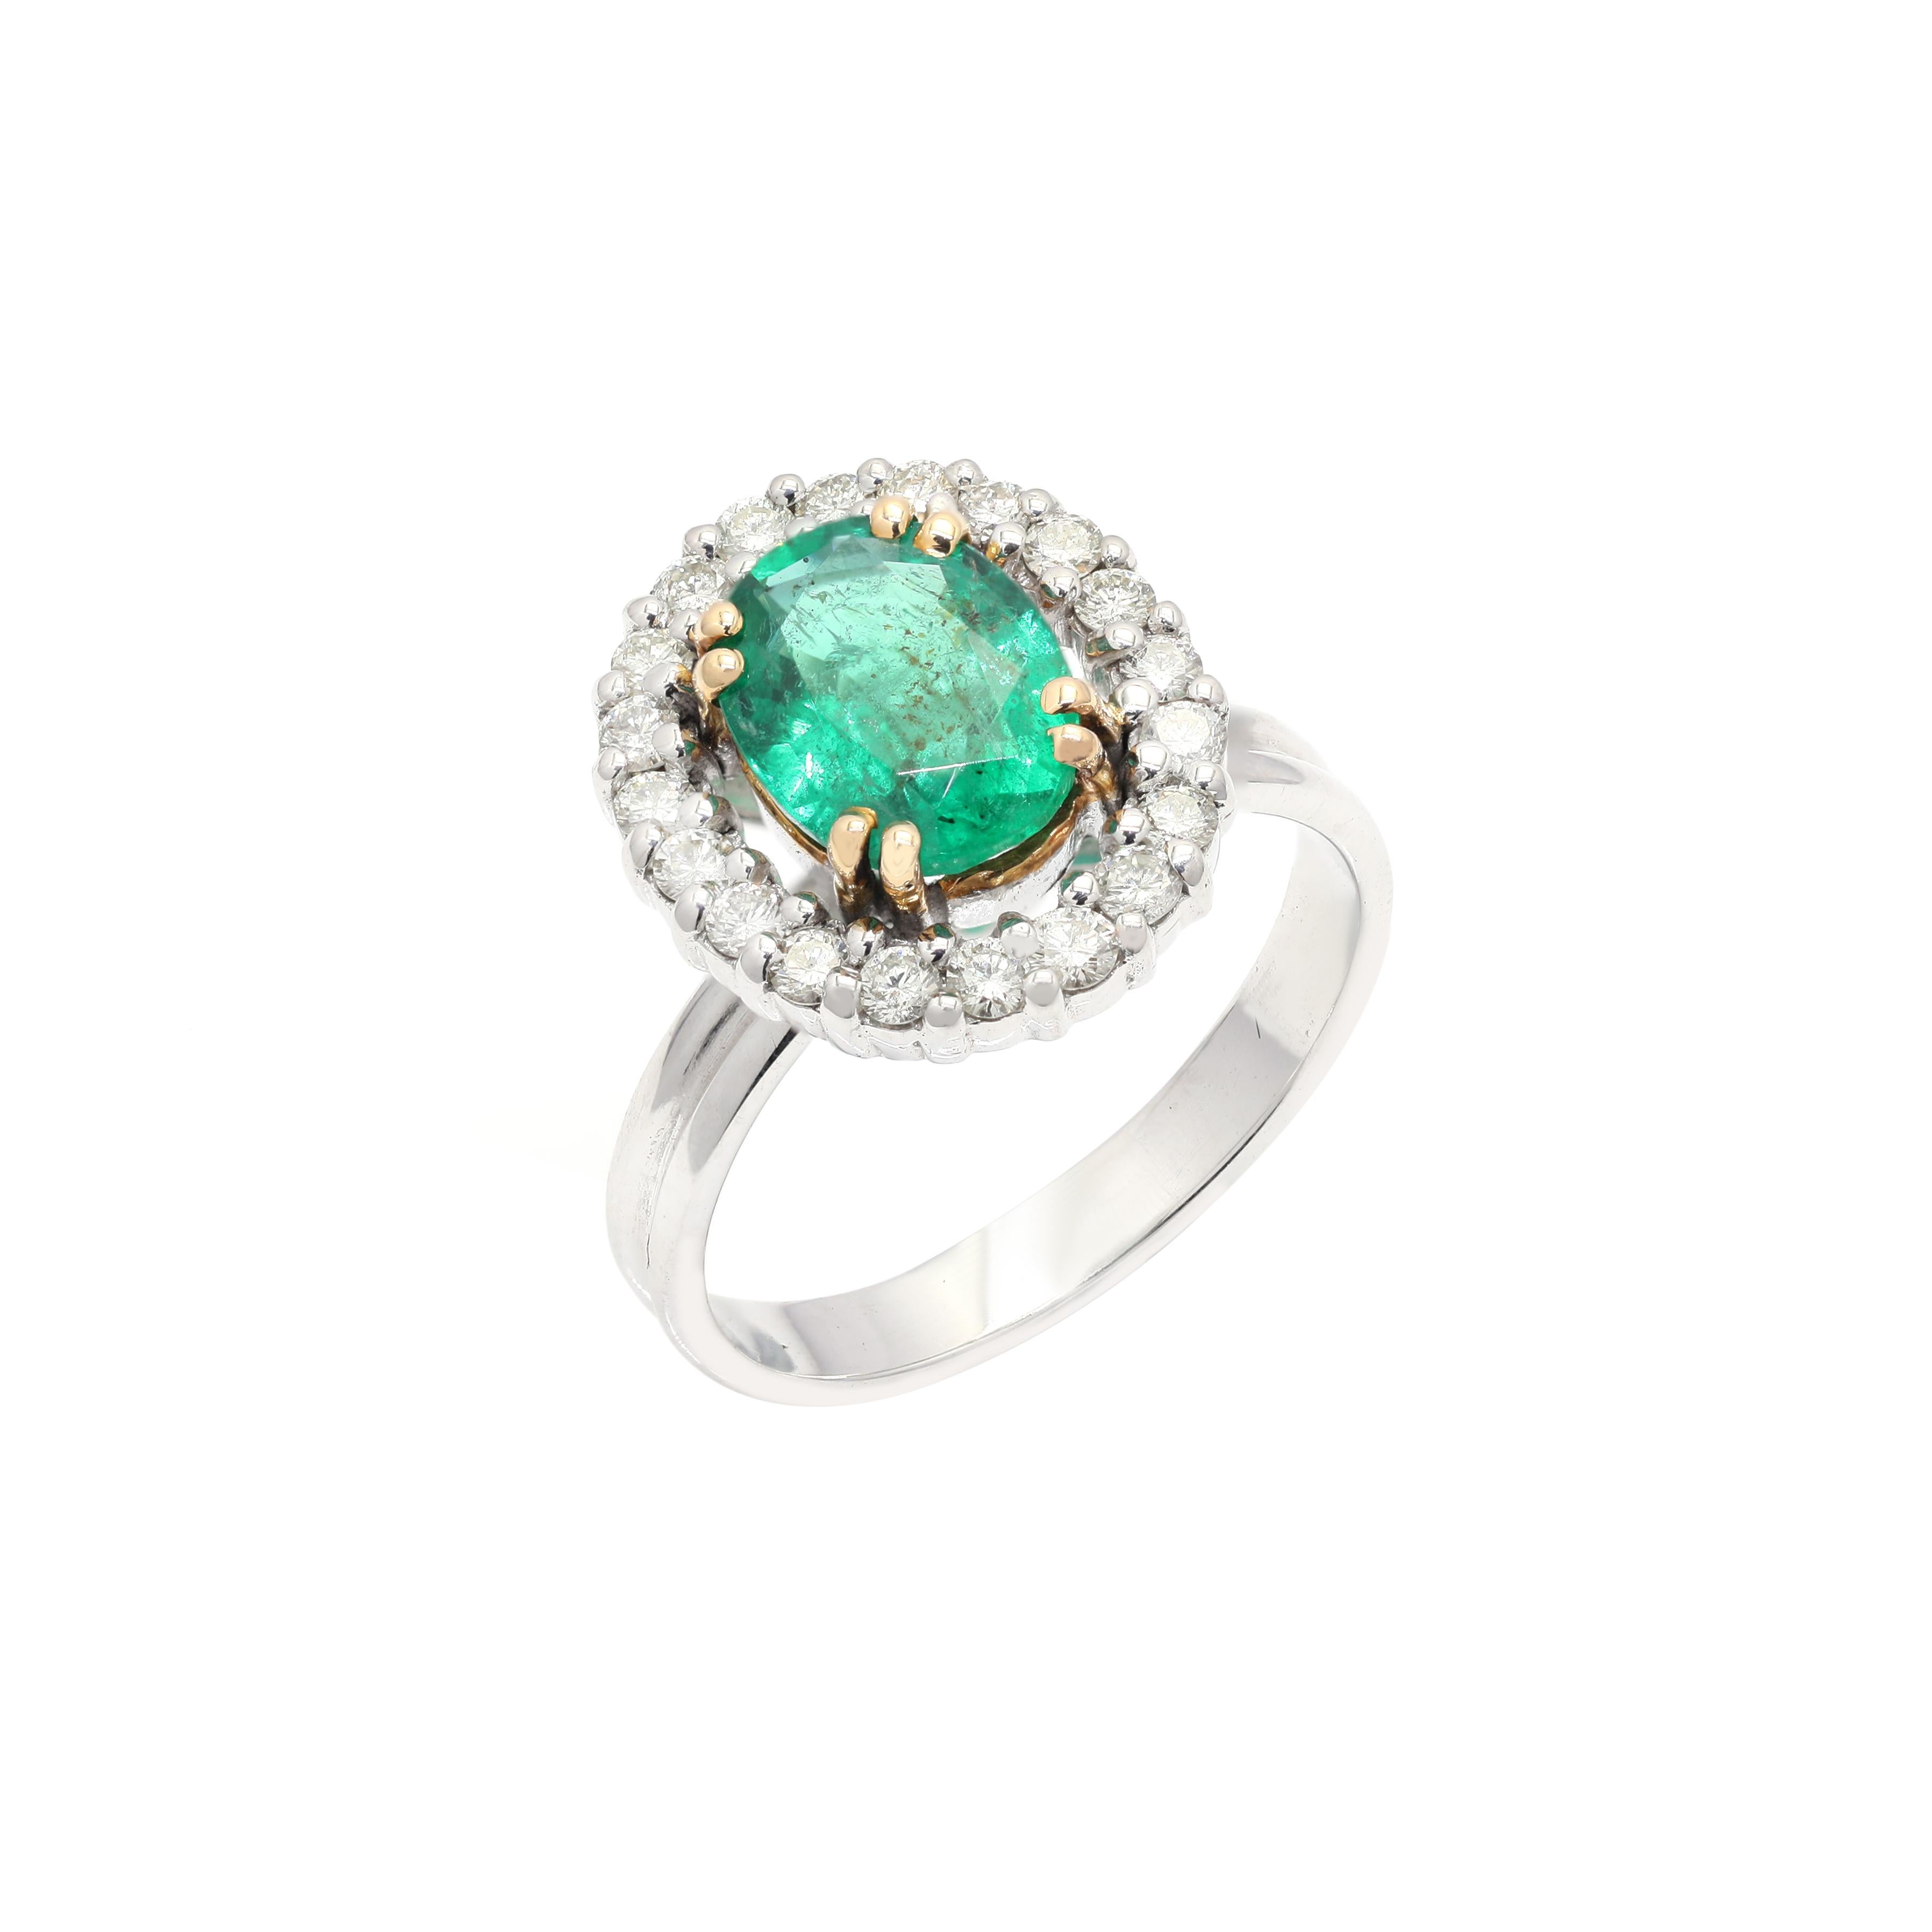 For Sale:  Genuine Diamond and Emerald Wedding Ring Embedded in 18K White Gold 4